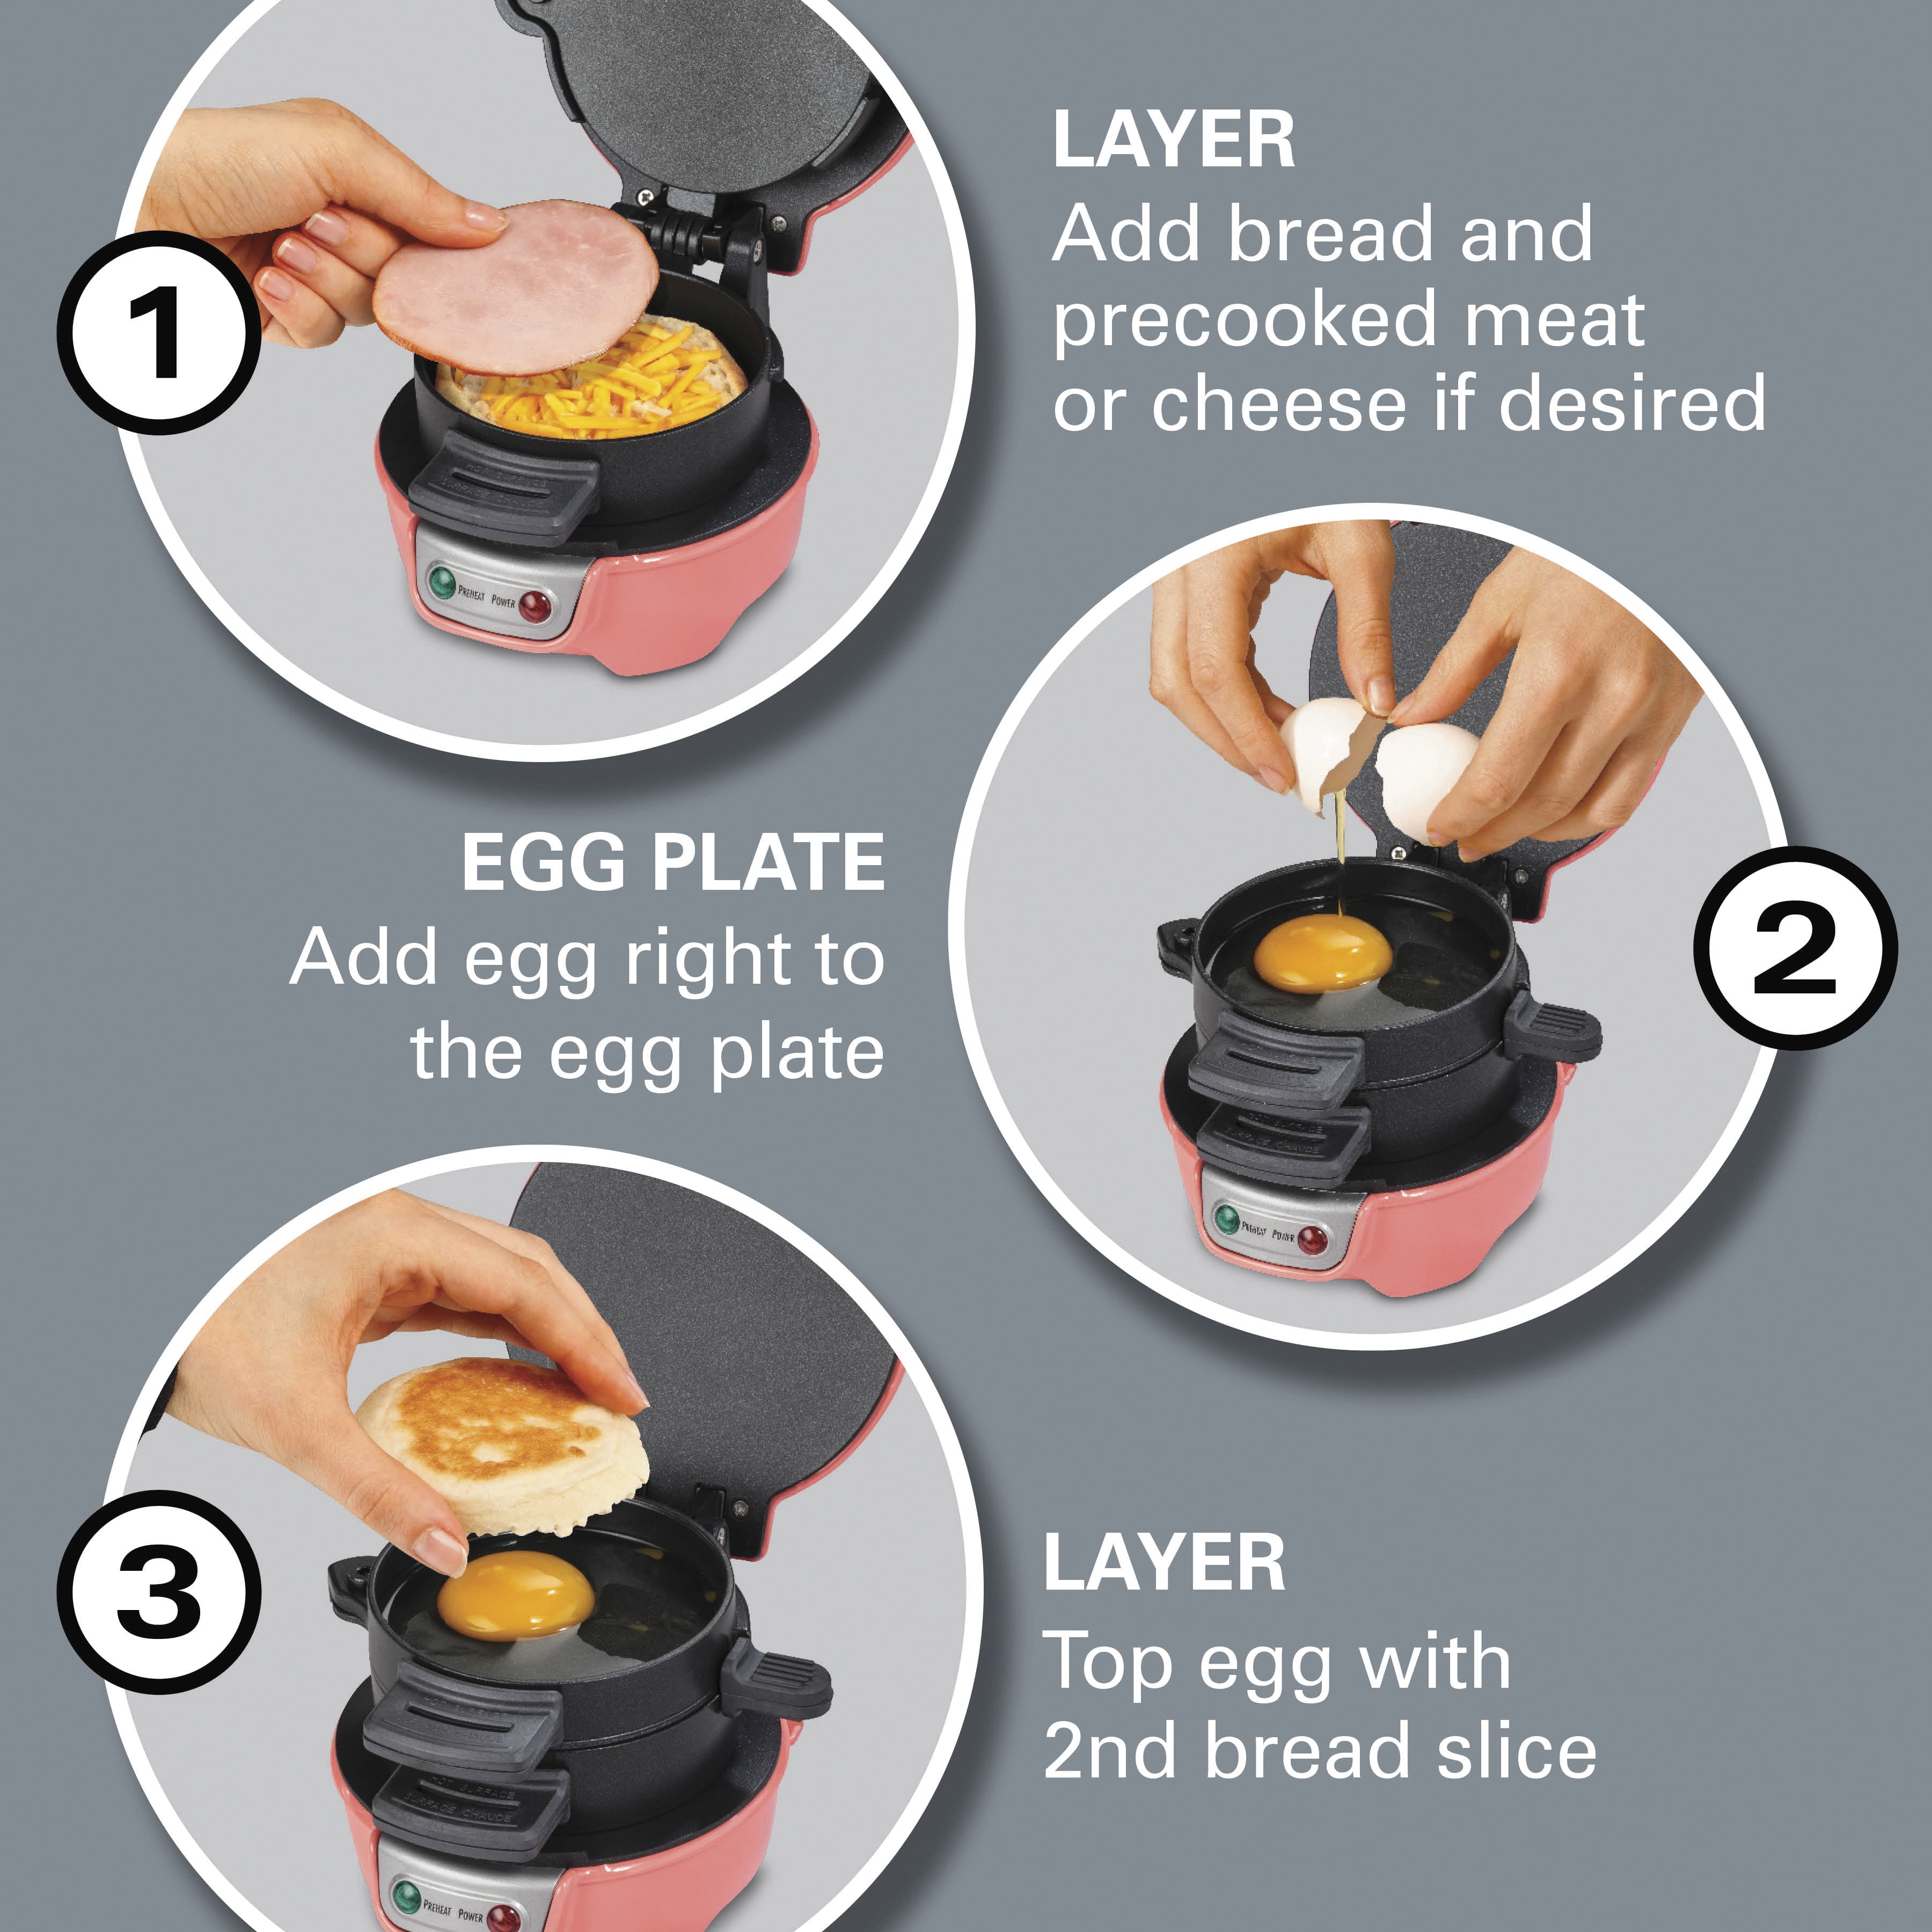 Hamilton Beach Breakfast Sandwich Maker with Egg Cooker Ring, Customize  Ingredients, Mint, 25482